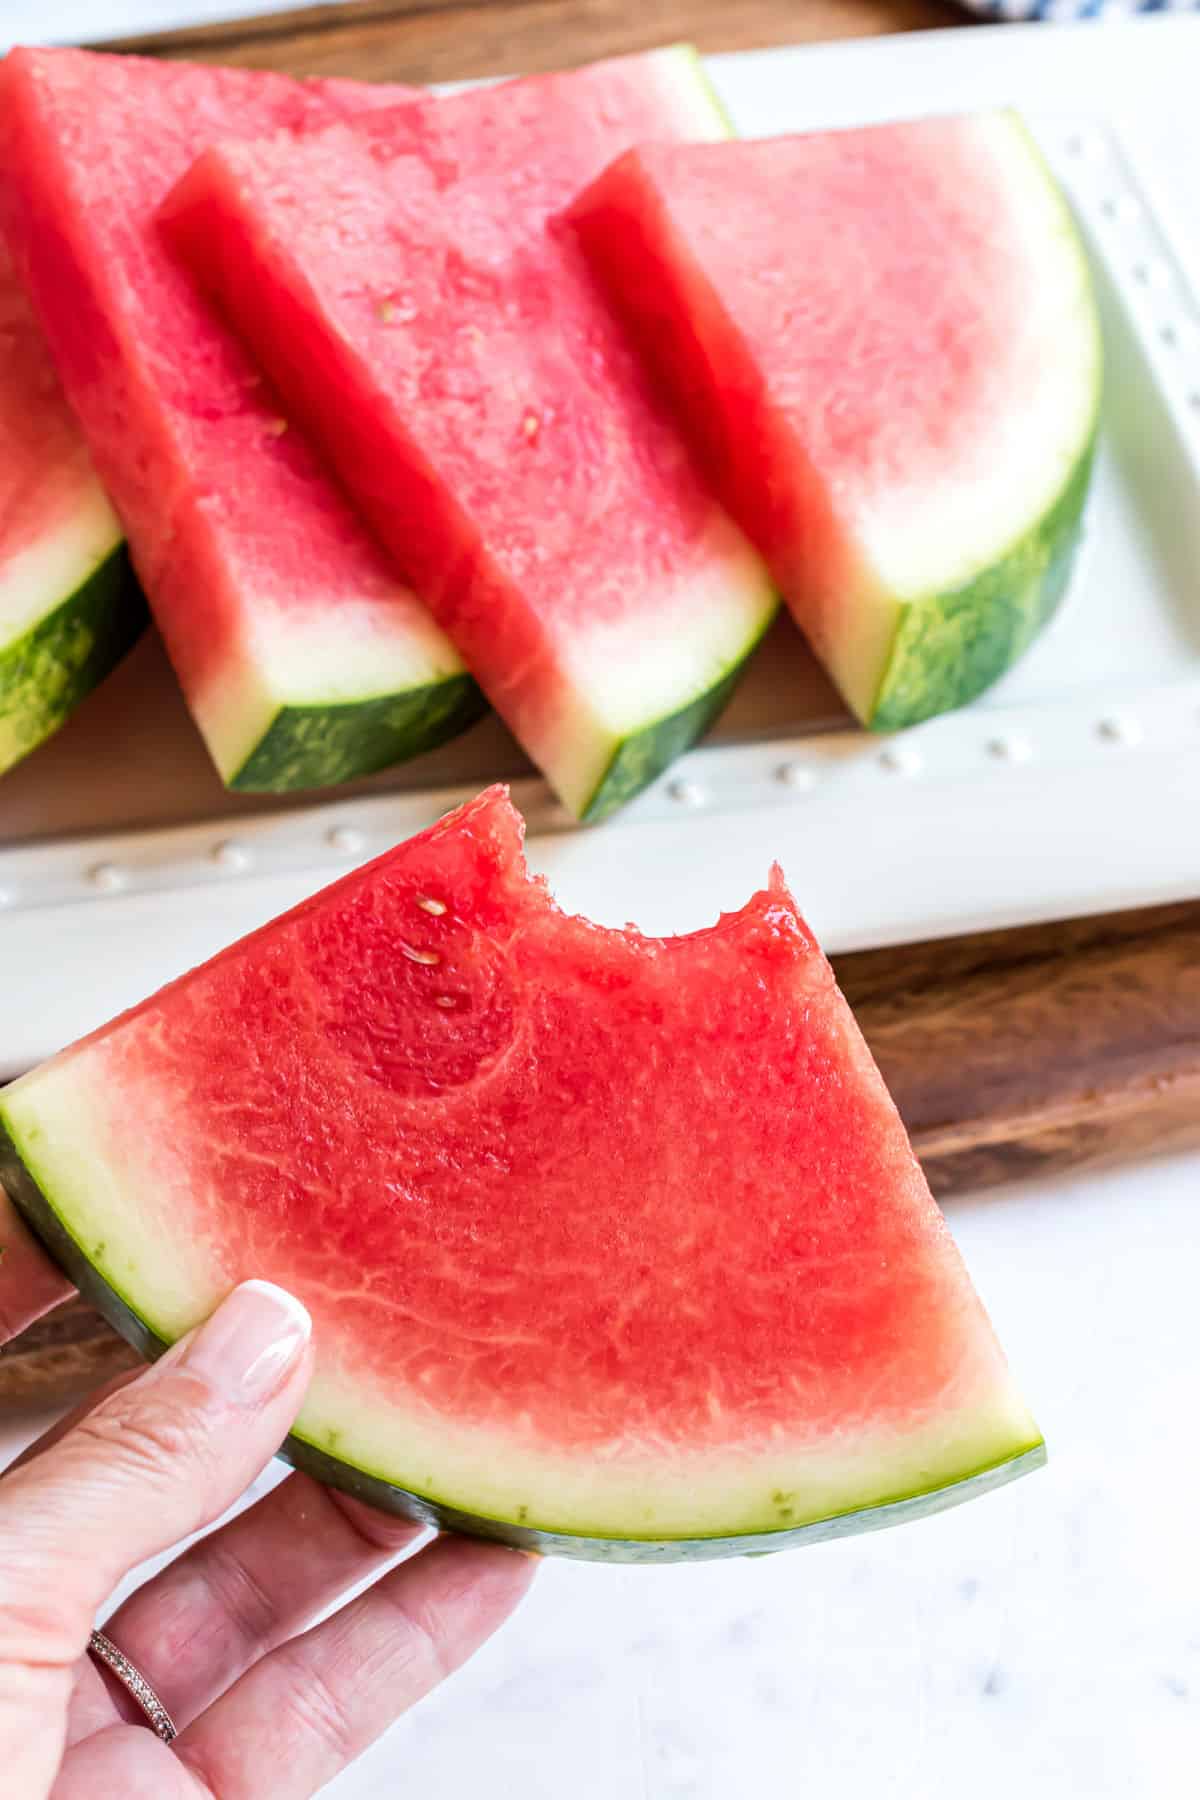 Wedge of watermelon with a bite taken out.